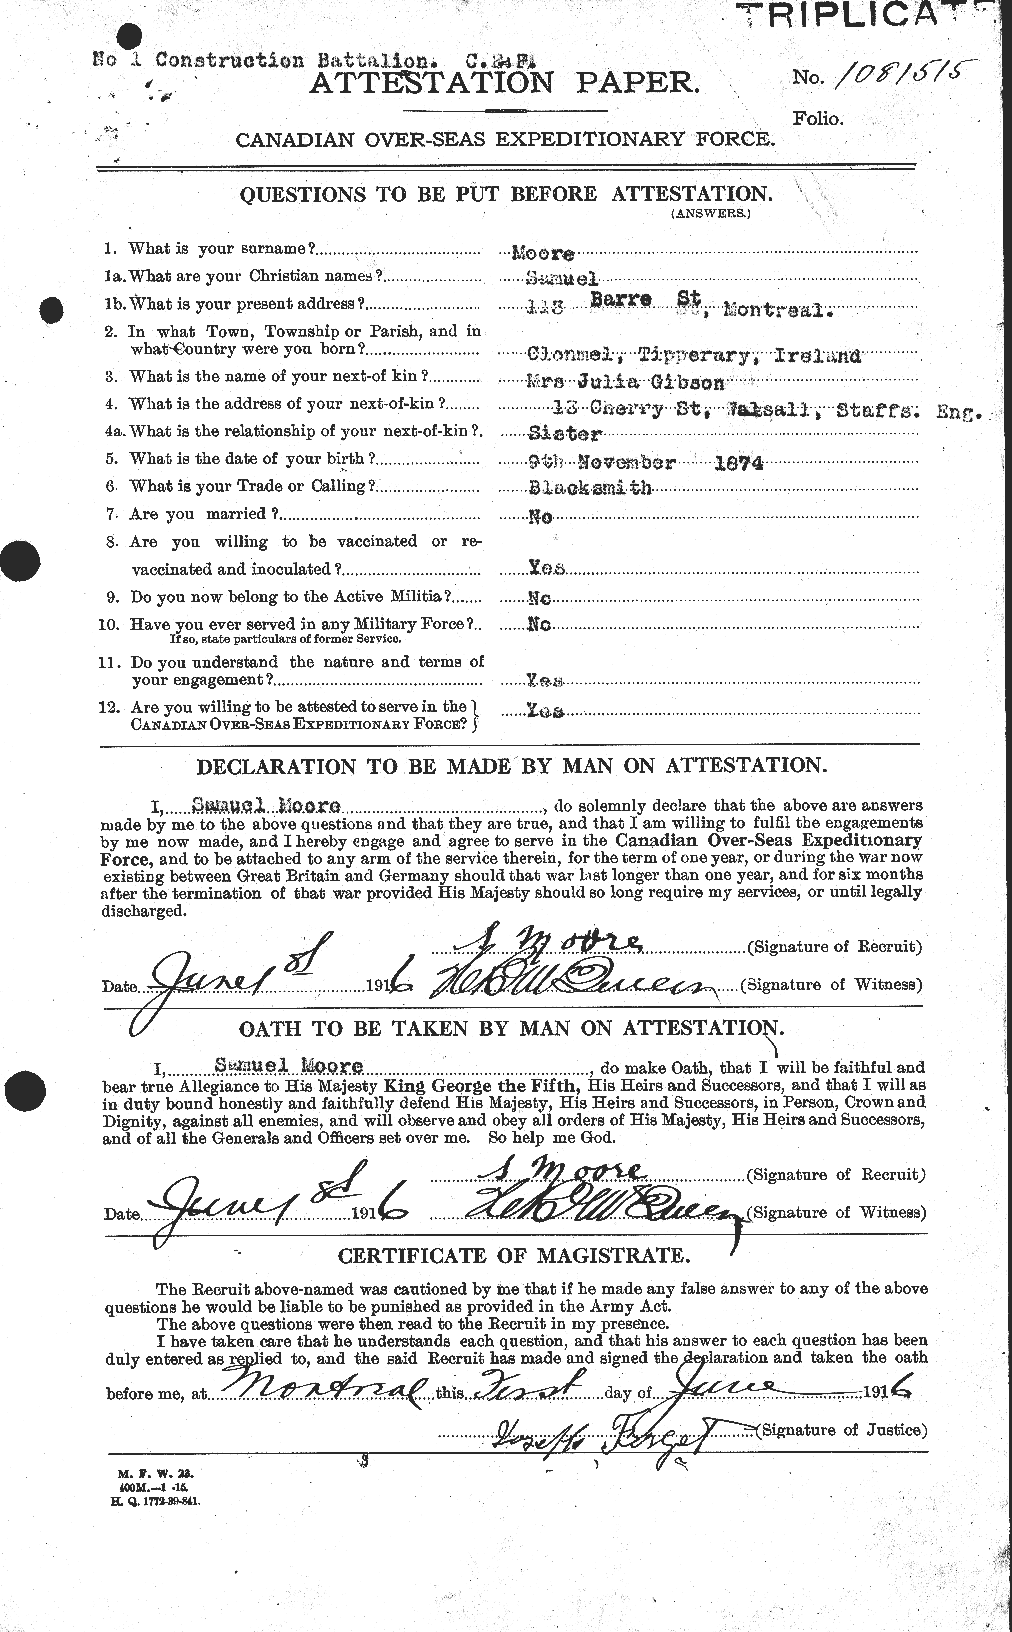 Personnel Records of the First World War - CEF 503608a